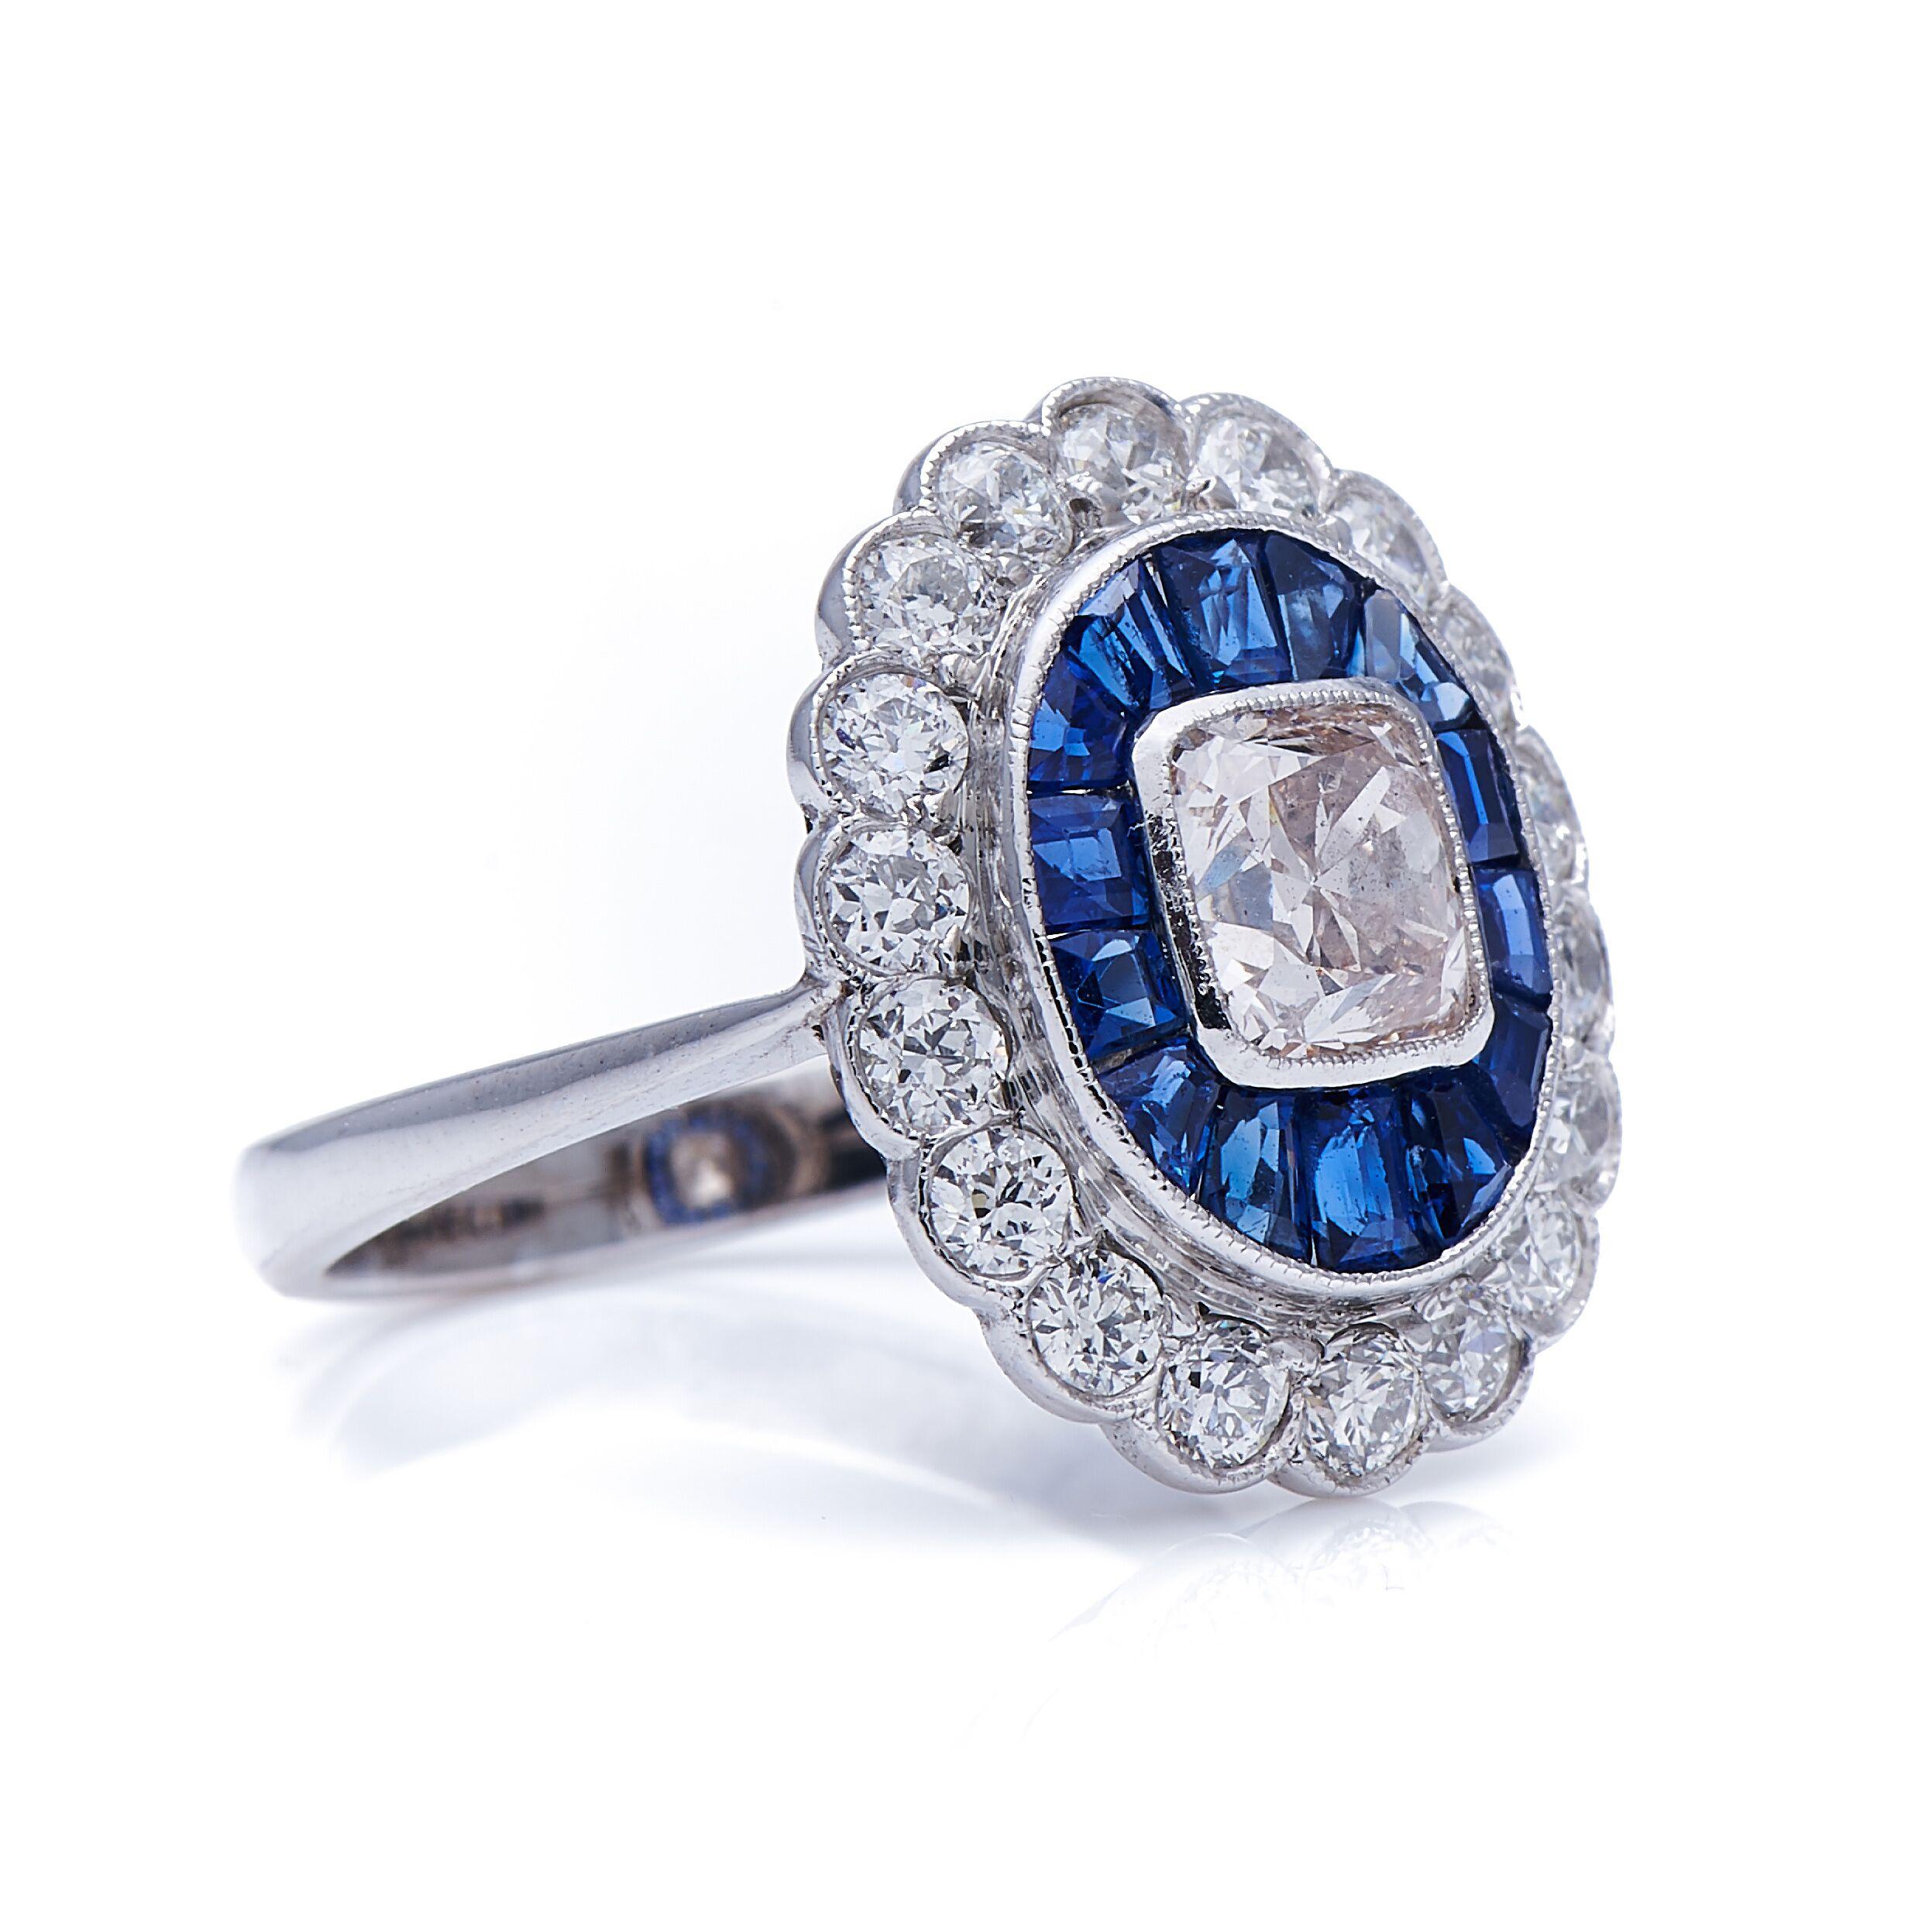 Diamond and sapphire ring. The centre of this glamorous ring is collet-set with a square cushion diamond weighing approximately 1.20 carats, within a border of radiating calibré-cut sapphires, to an outer floral border of circular-cut diamonds. The